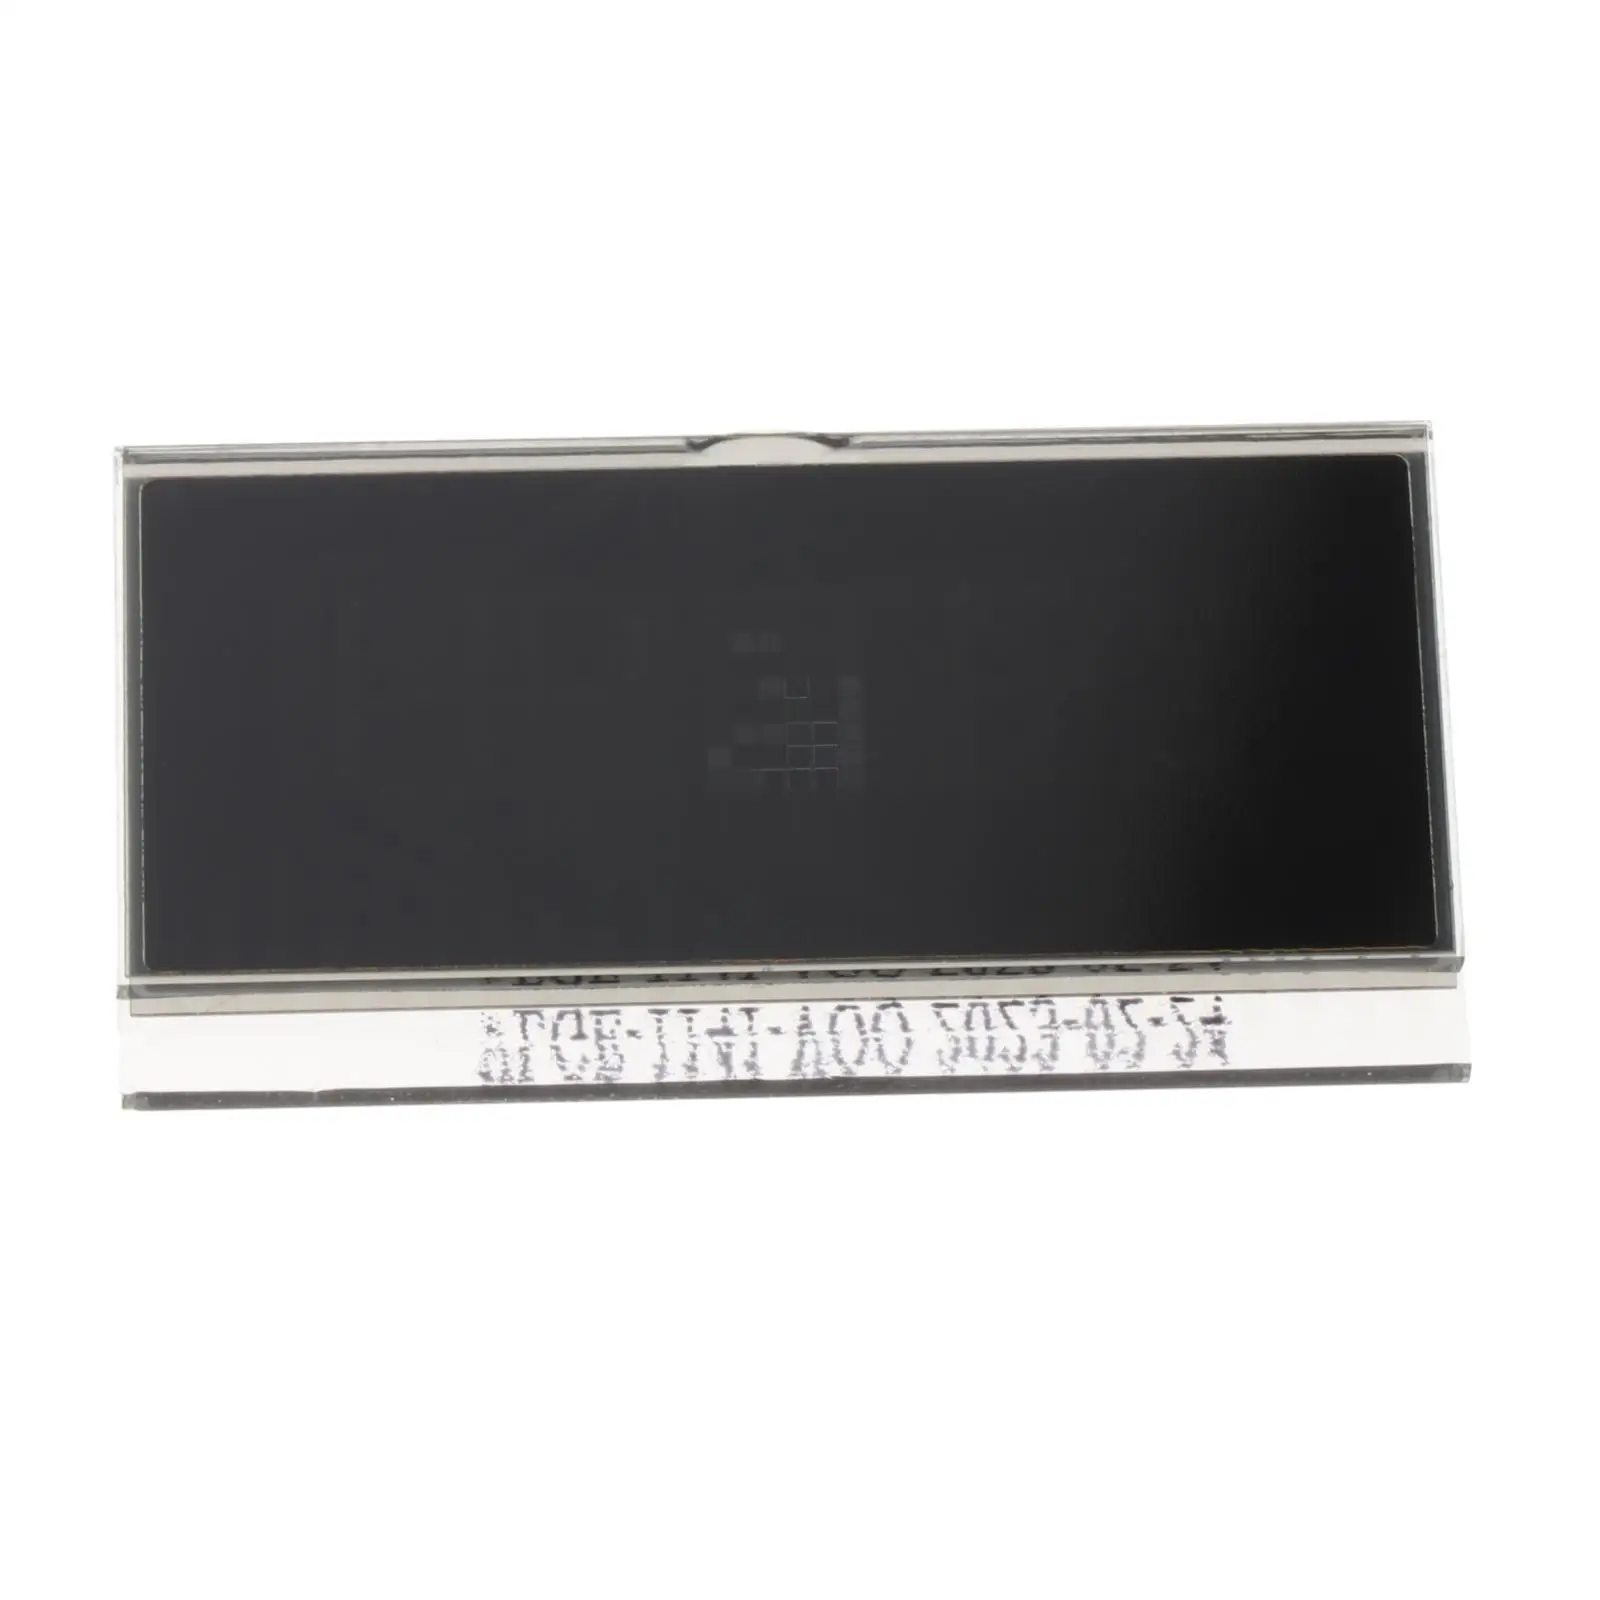 LCD Display Screen Professional Replacement Parts Durable for Audi A6 4F Q7 4L 2005-2012 Automotive Accessories